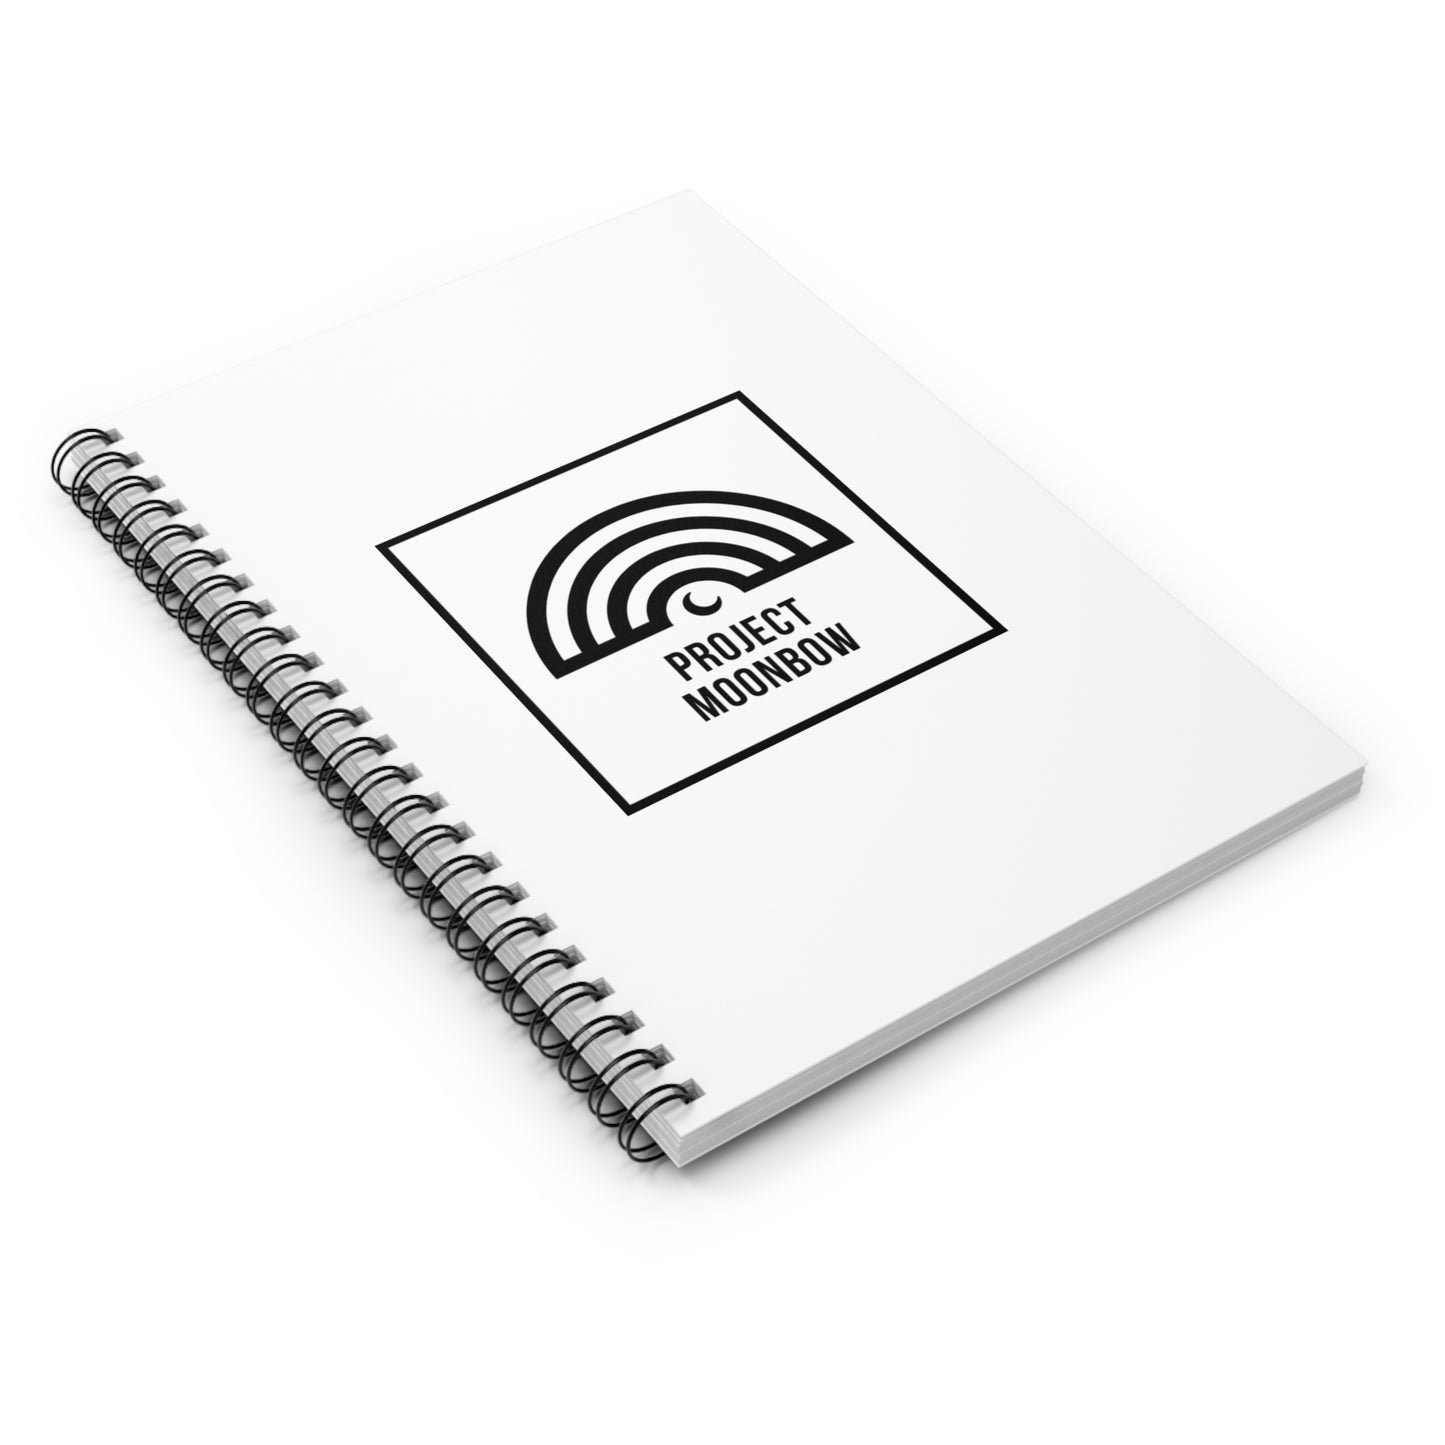 Project Moonbow Spiral Notebook - Ruled Line, Journal, Notepad, Notebook